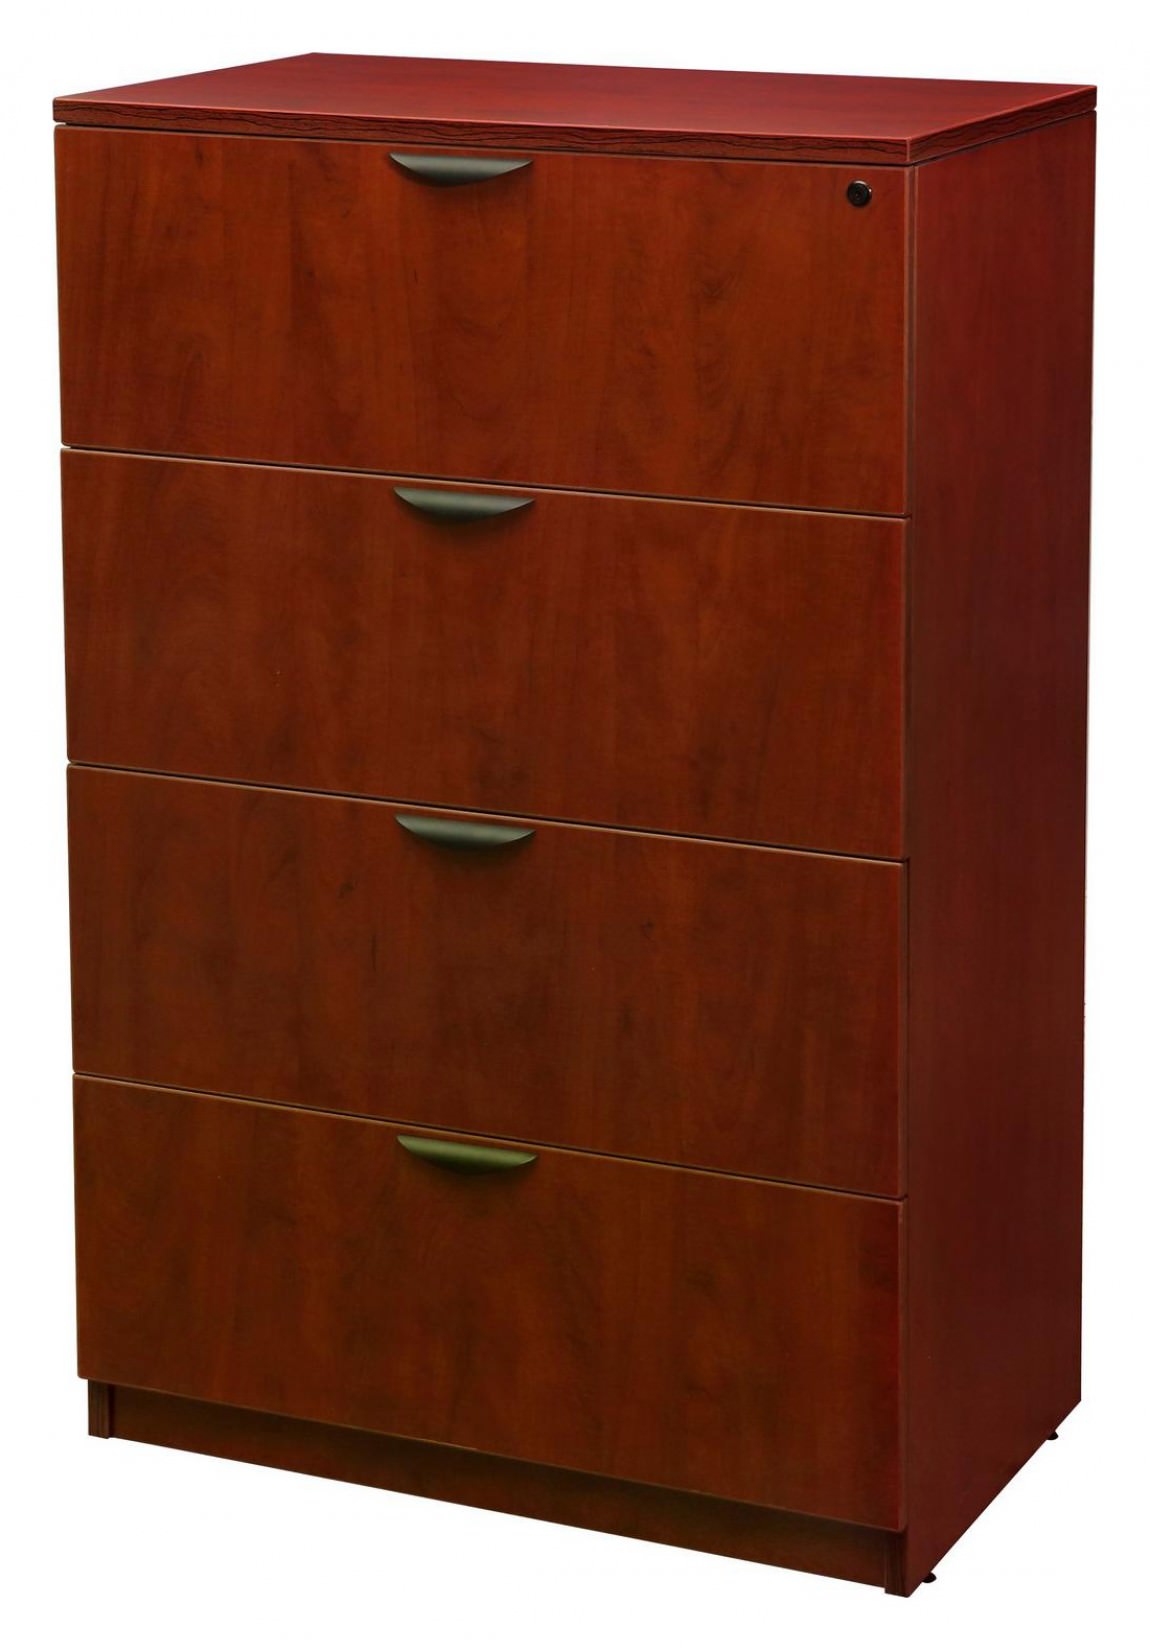 4 Drawer Lateral Filing Cabinet by Express Office Furniture